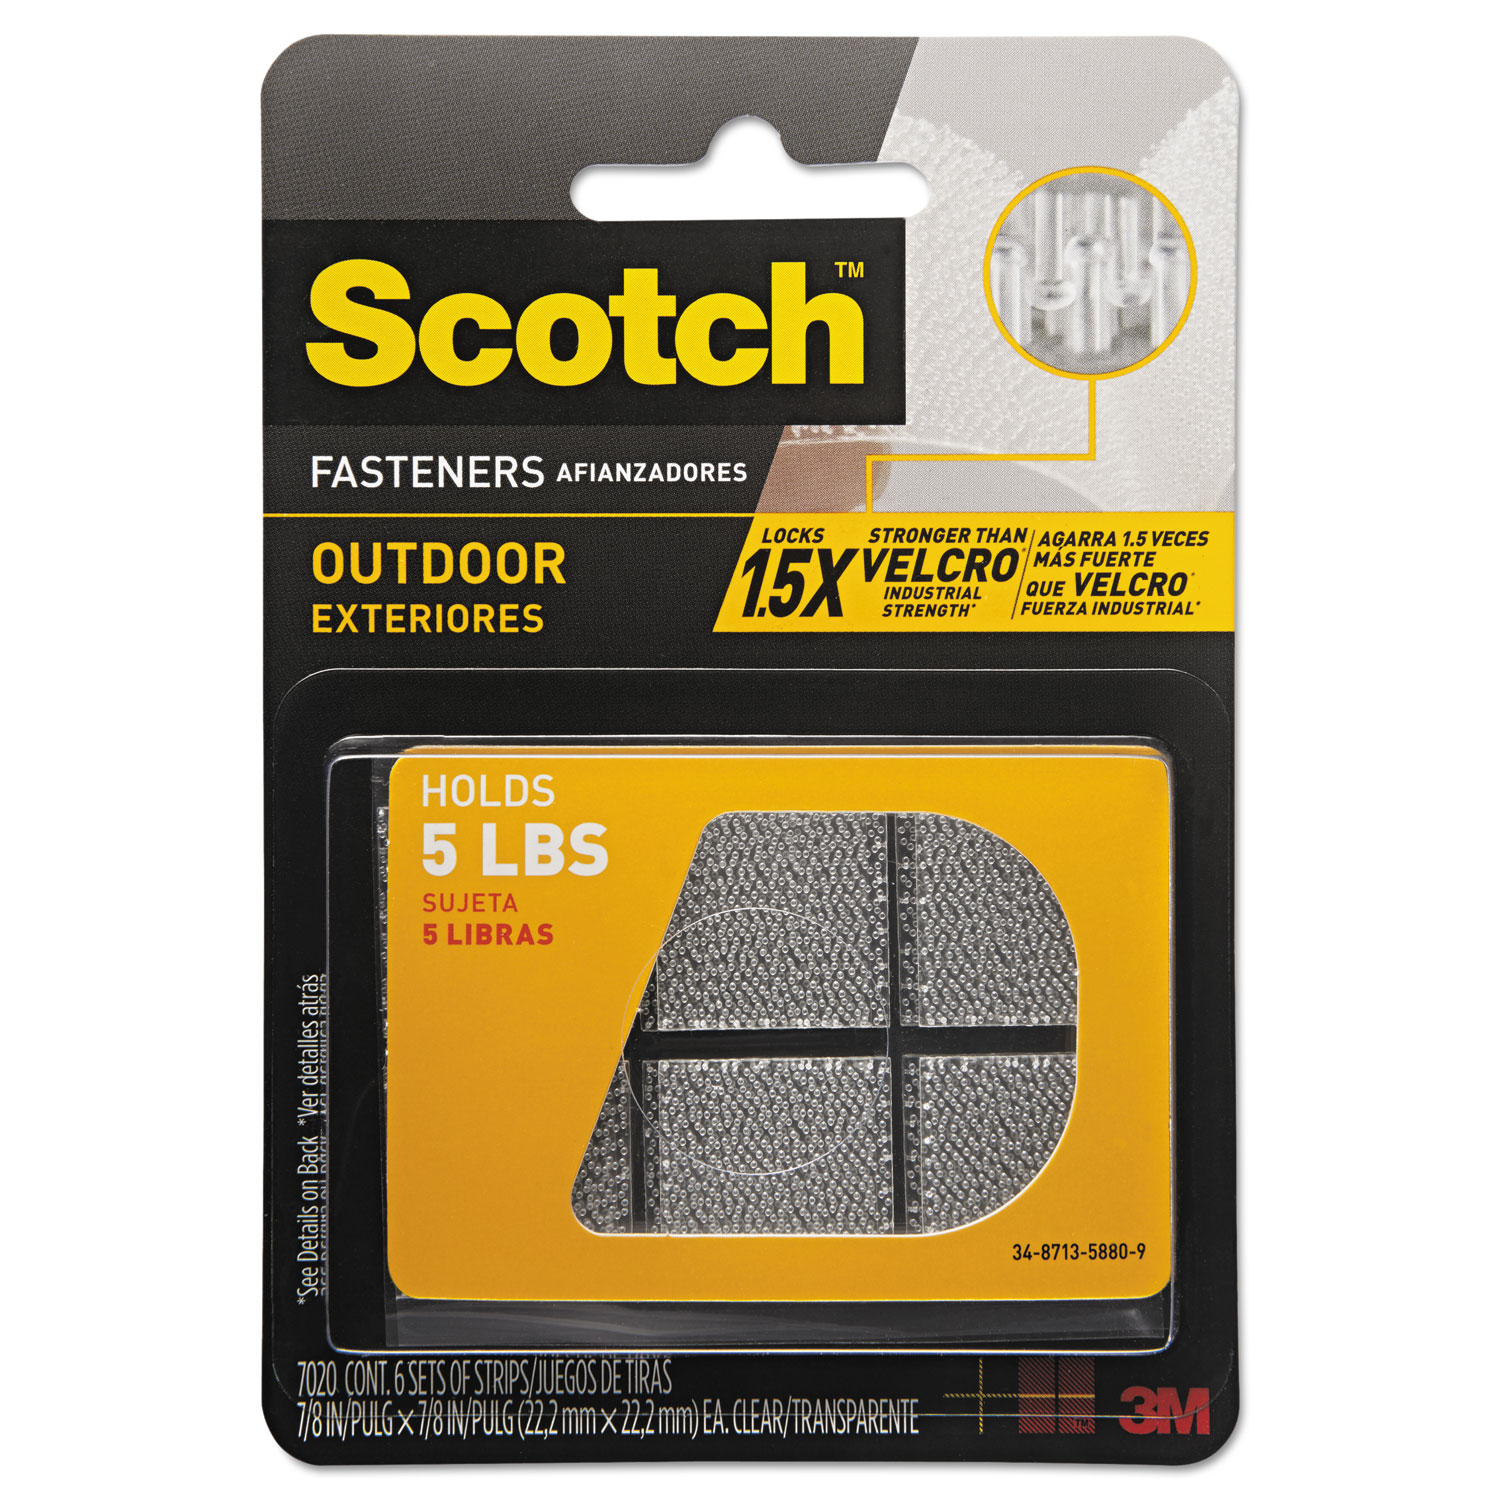  Scotch RFLD7020 Outdoor Fasteners, 0.88 x 0.88, Clear, 6/Pack (MMMRFLD7020) 